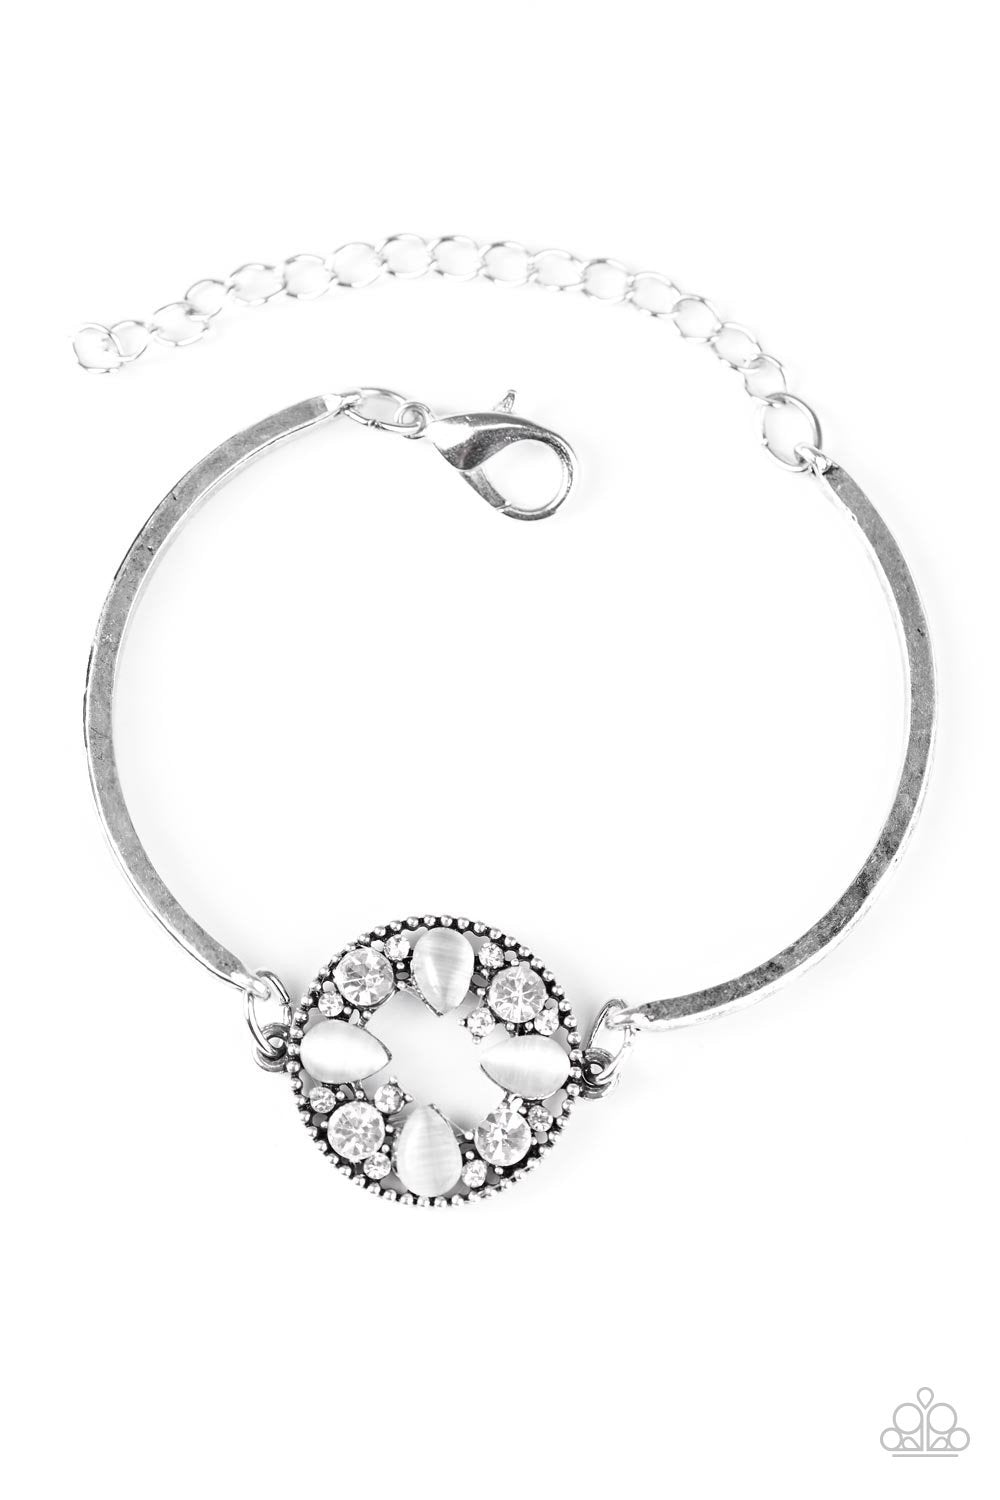 A Moonwalk In The Park White Moonstone Bracelet - Paparazzi Accessories-CarasShop.com - $5 Jewelry by Cara Jewels